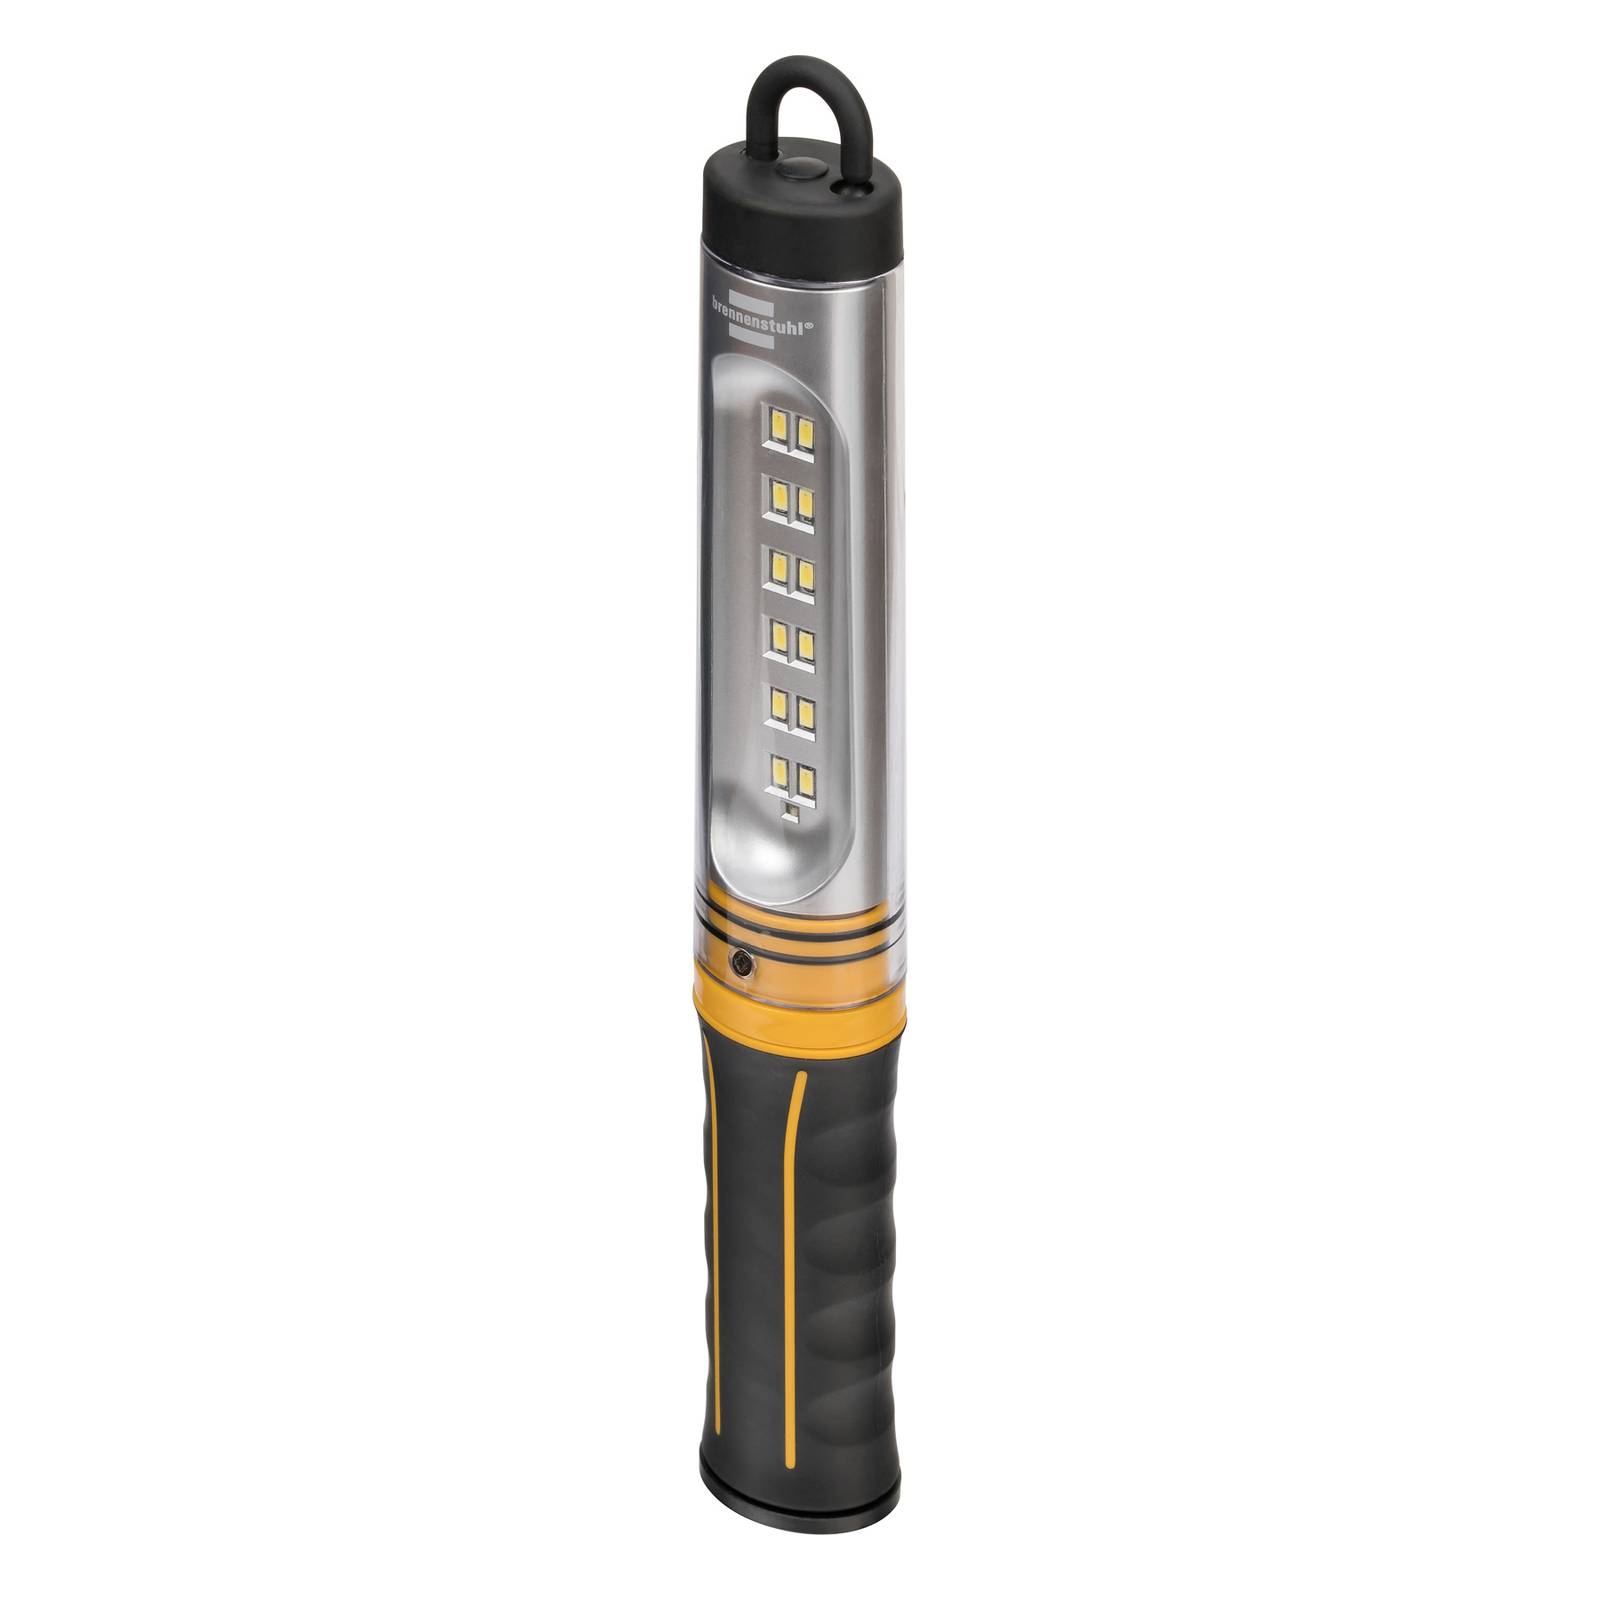 WL 500 A LED handheld light with battery